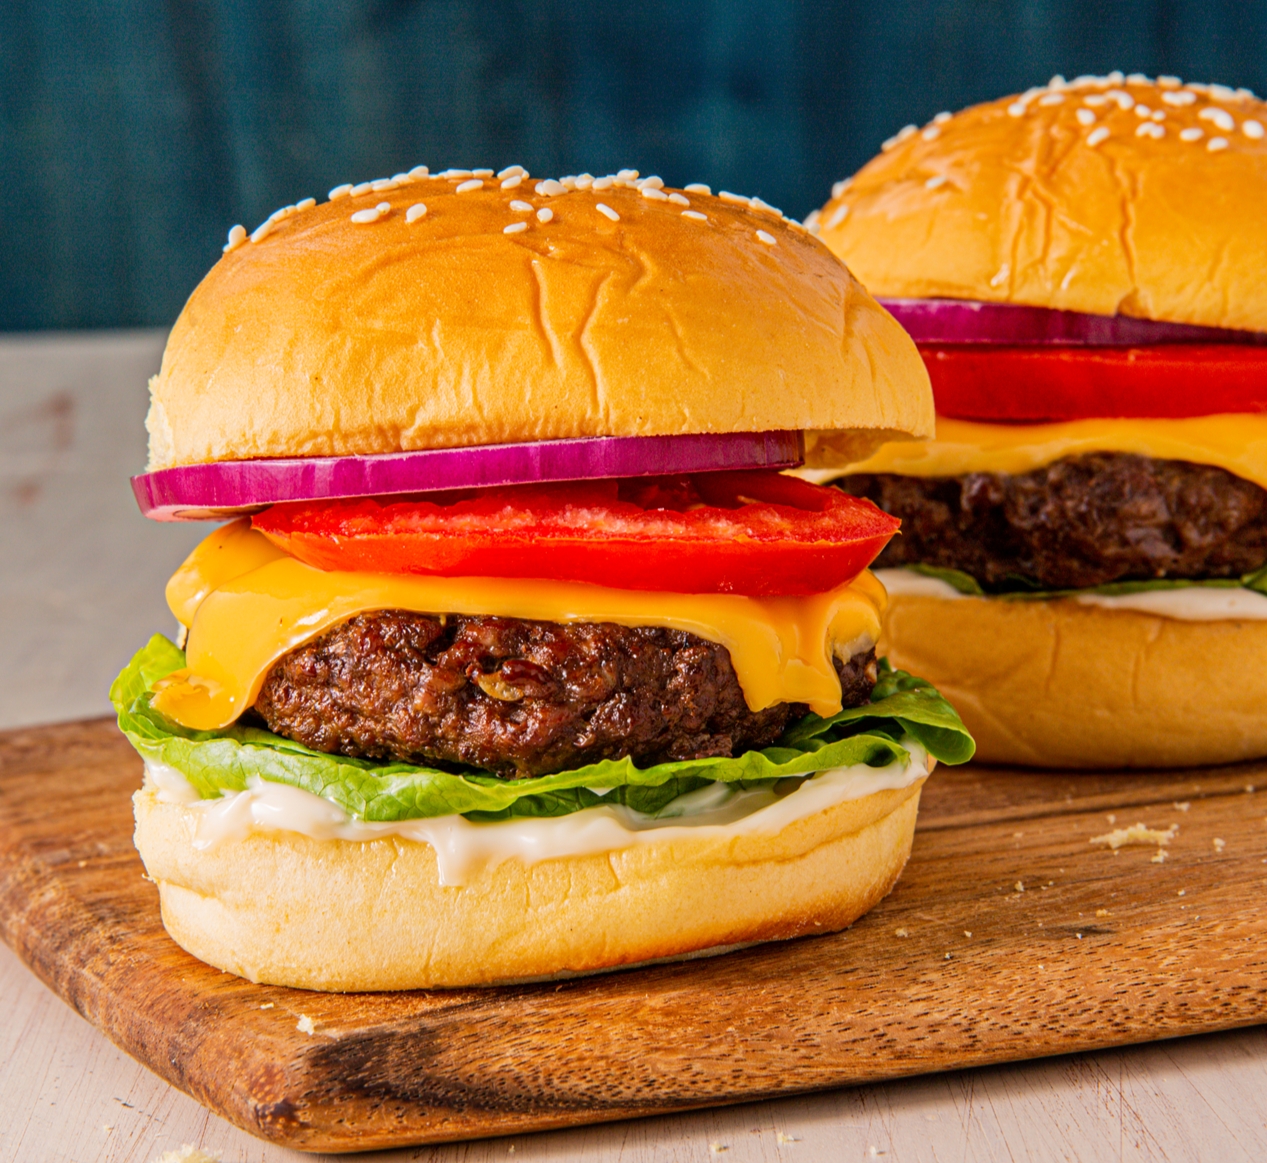 Two hamburgers placed on a wooden cutting board